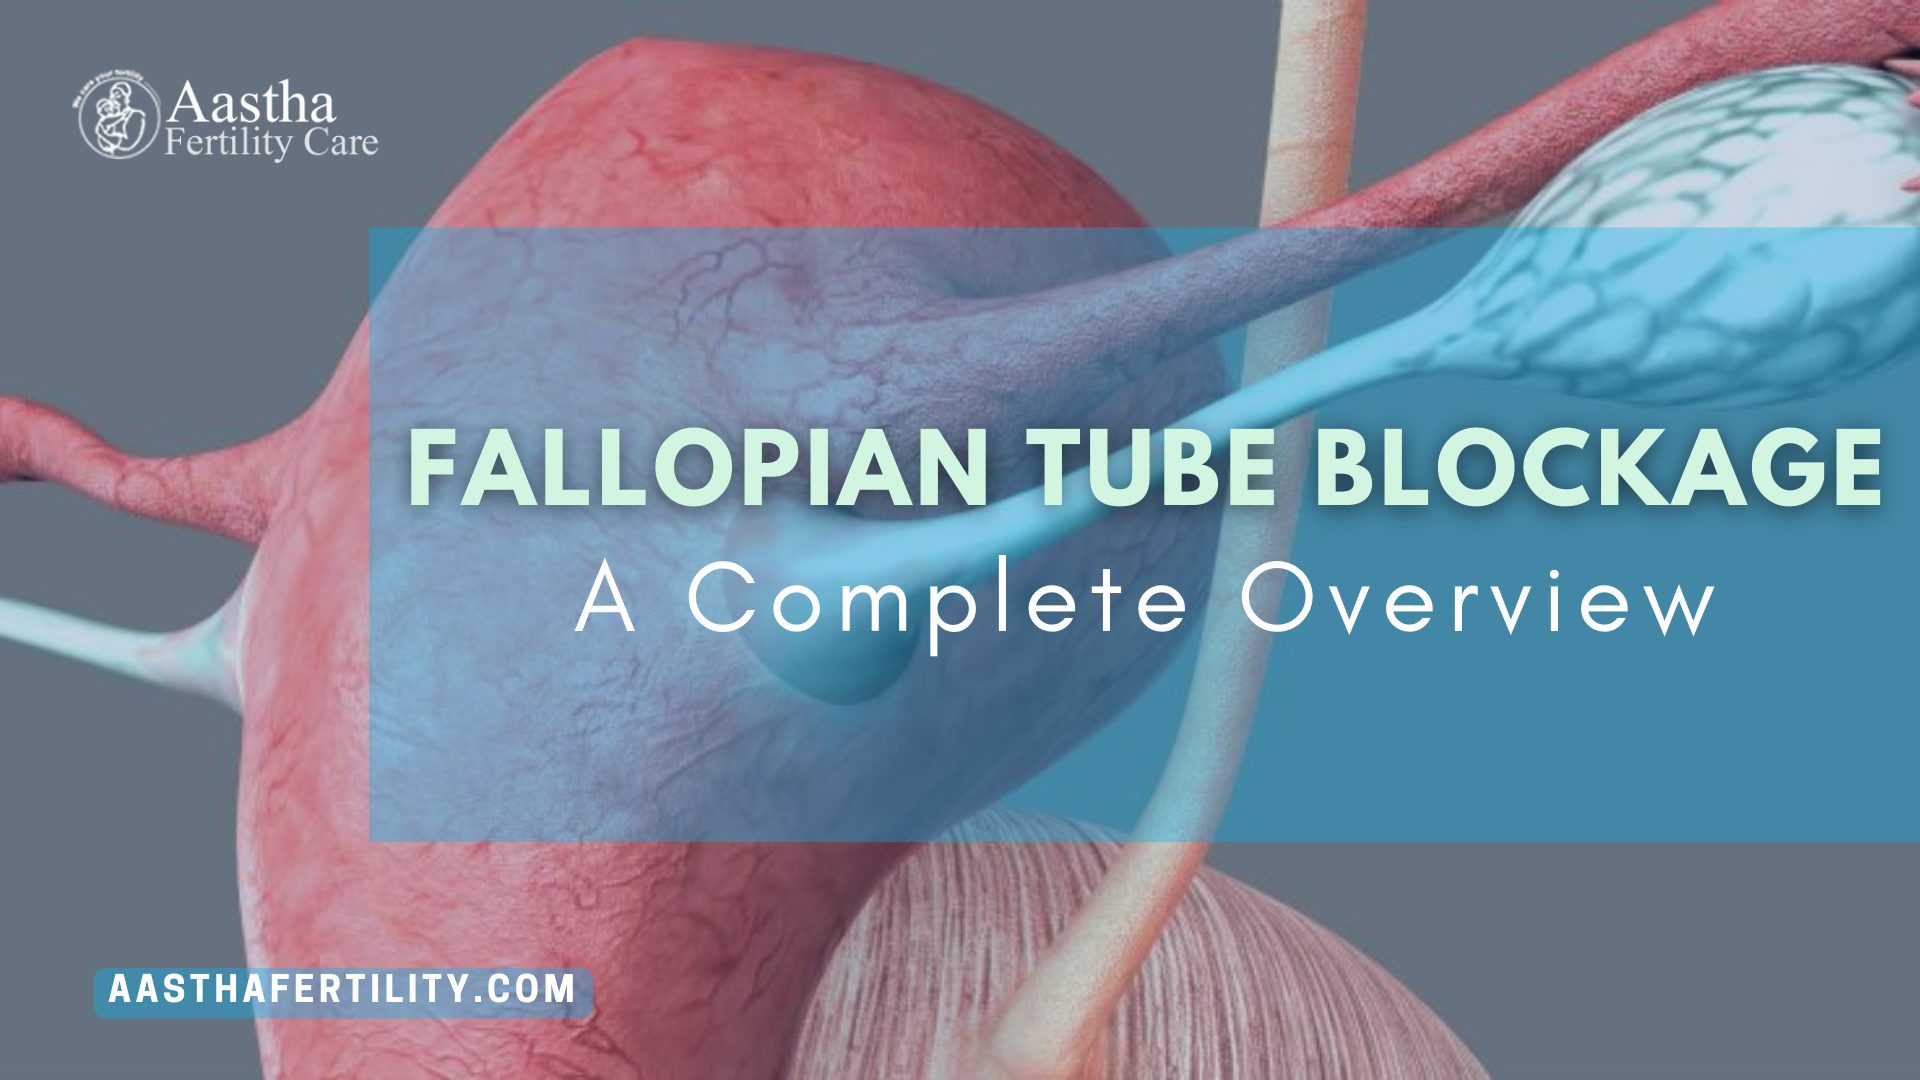 Fallopian Tube Blockage – A Complete Overview